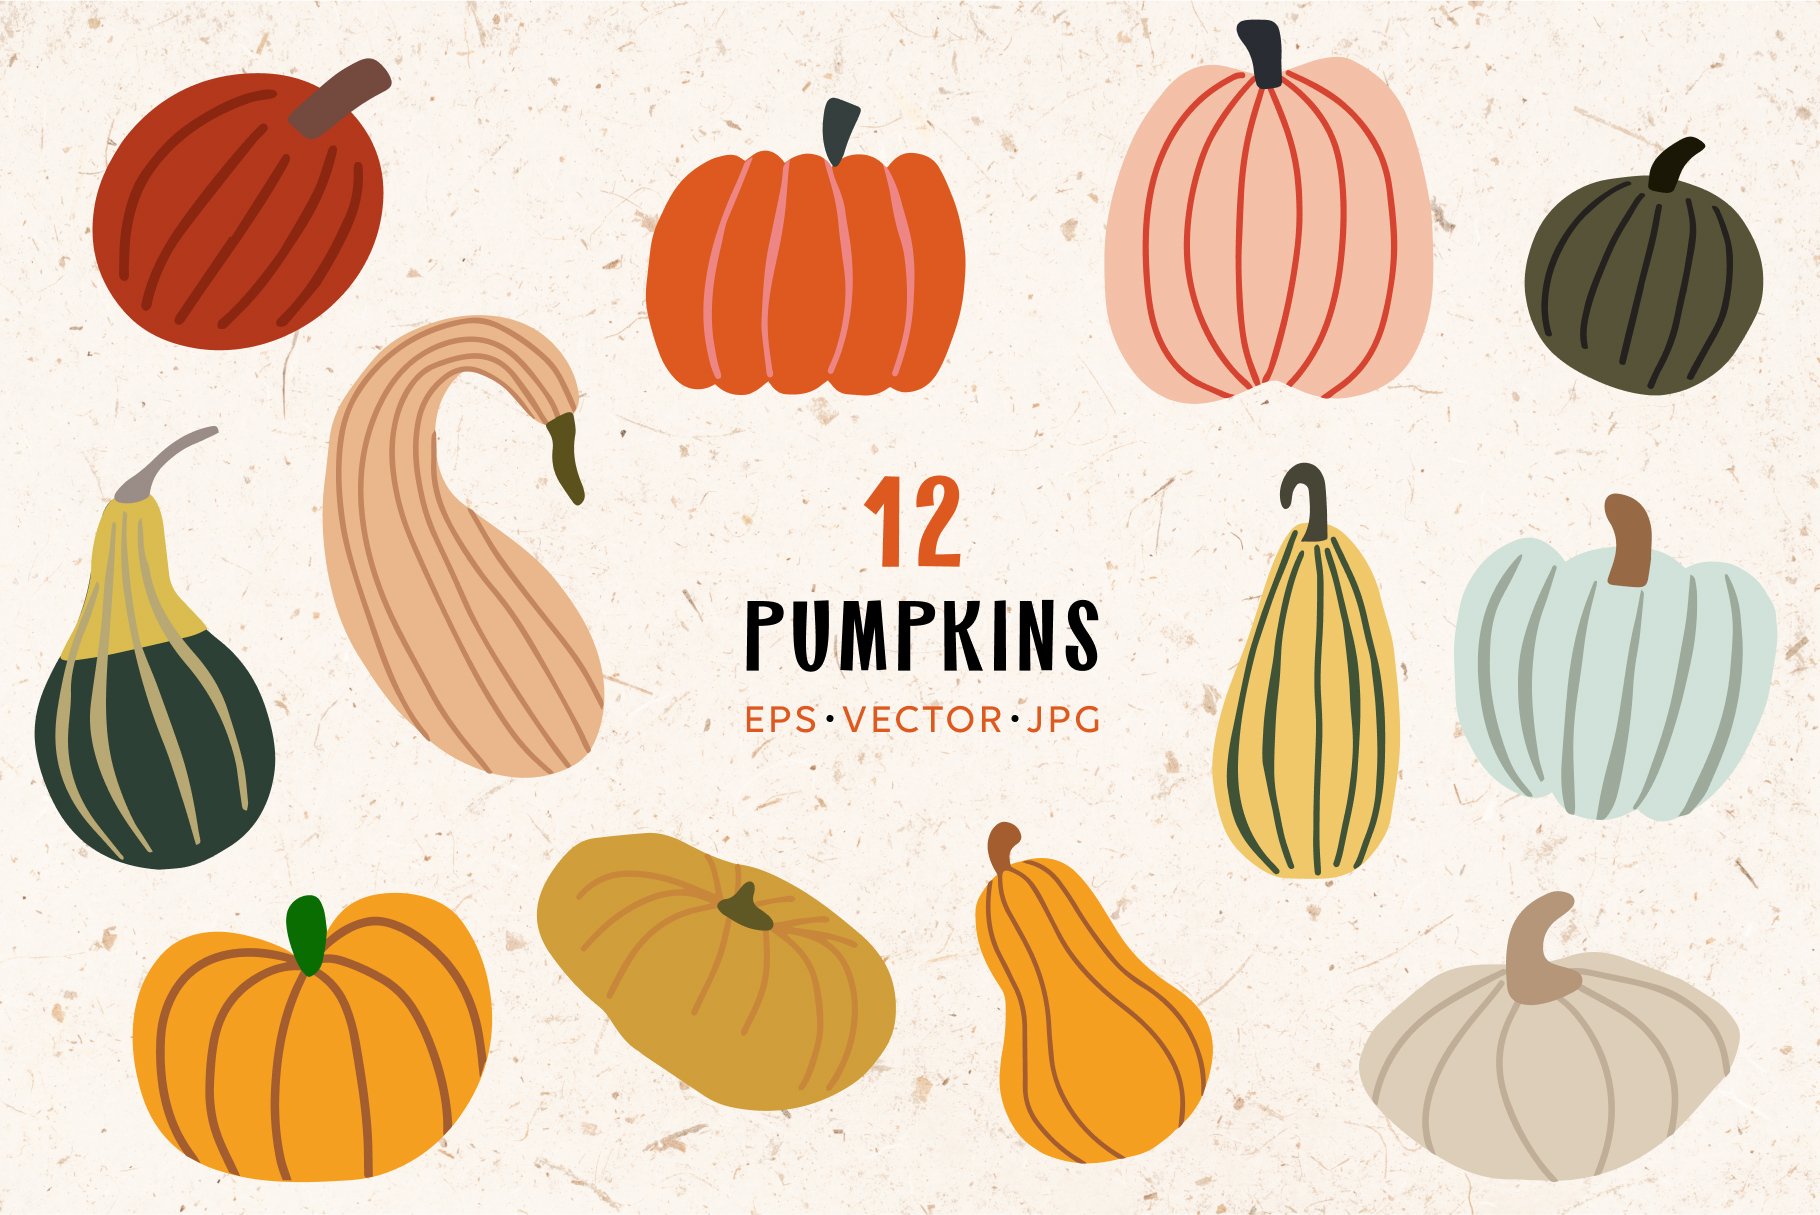 Diverse of colorful pumpkins in different shapes.